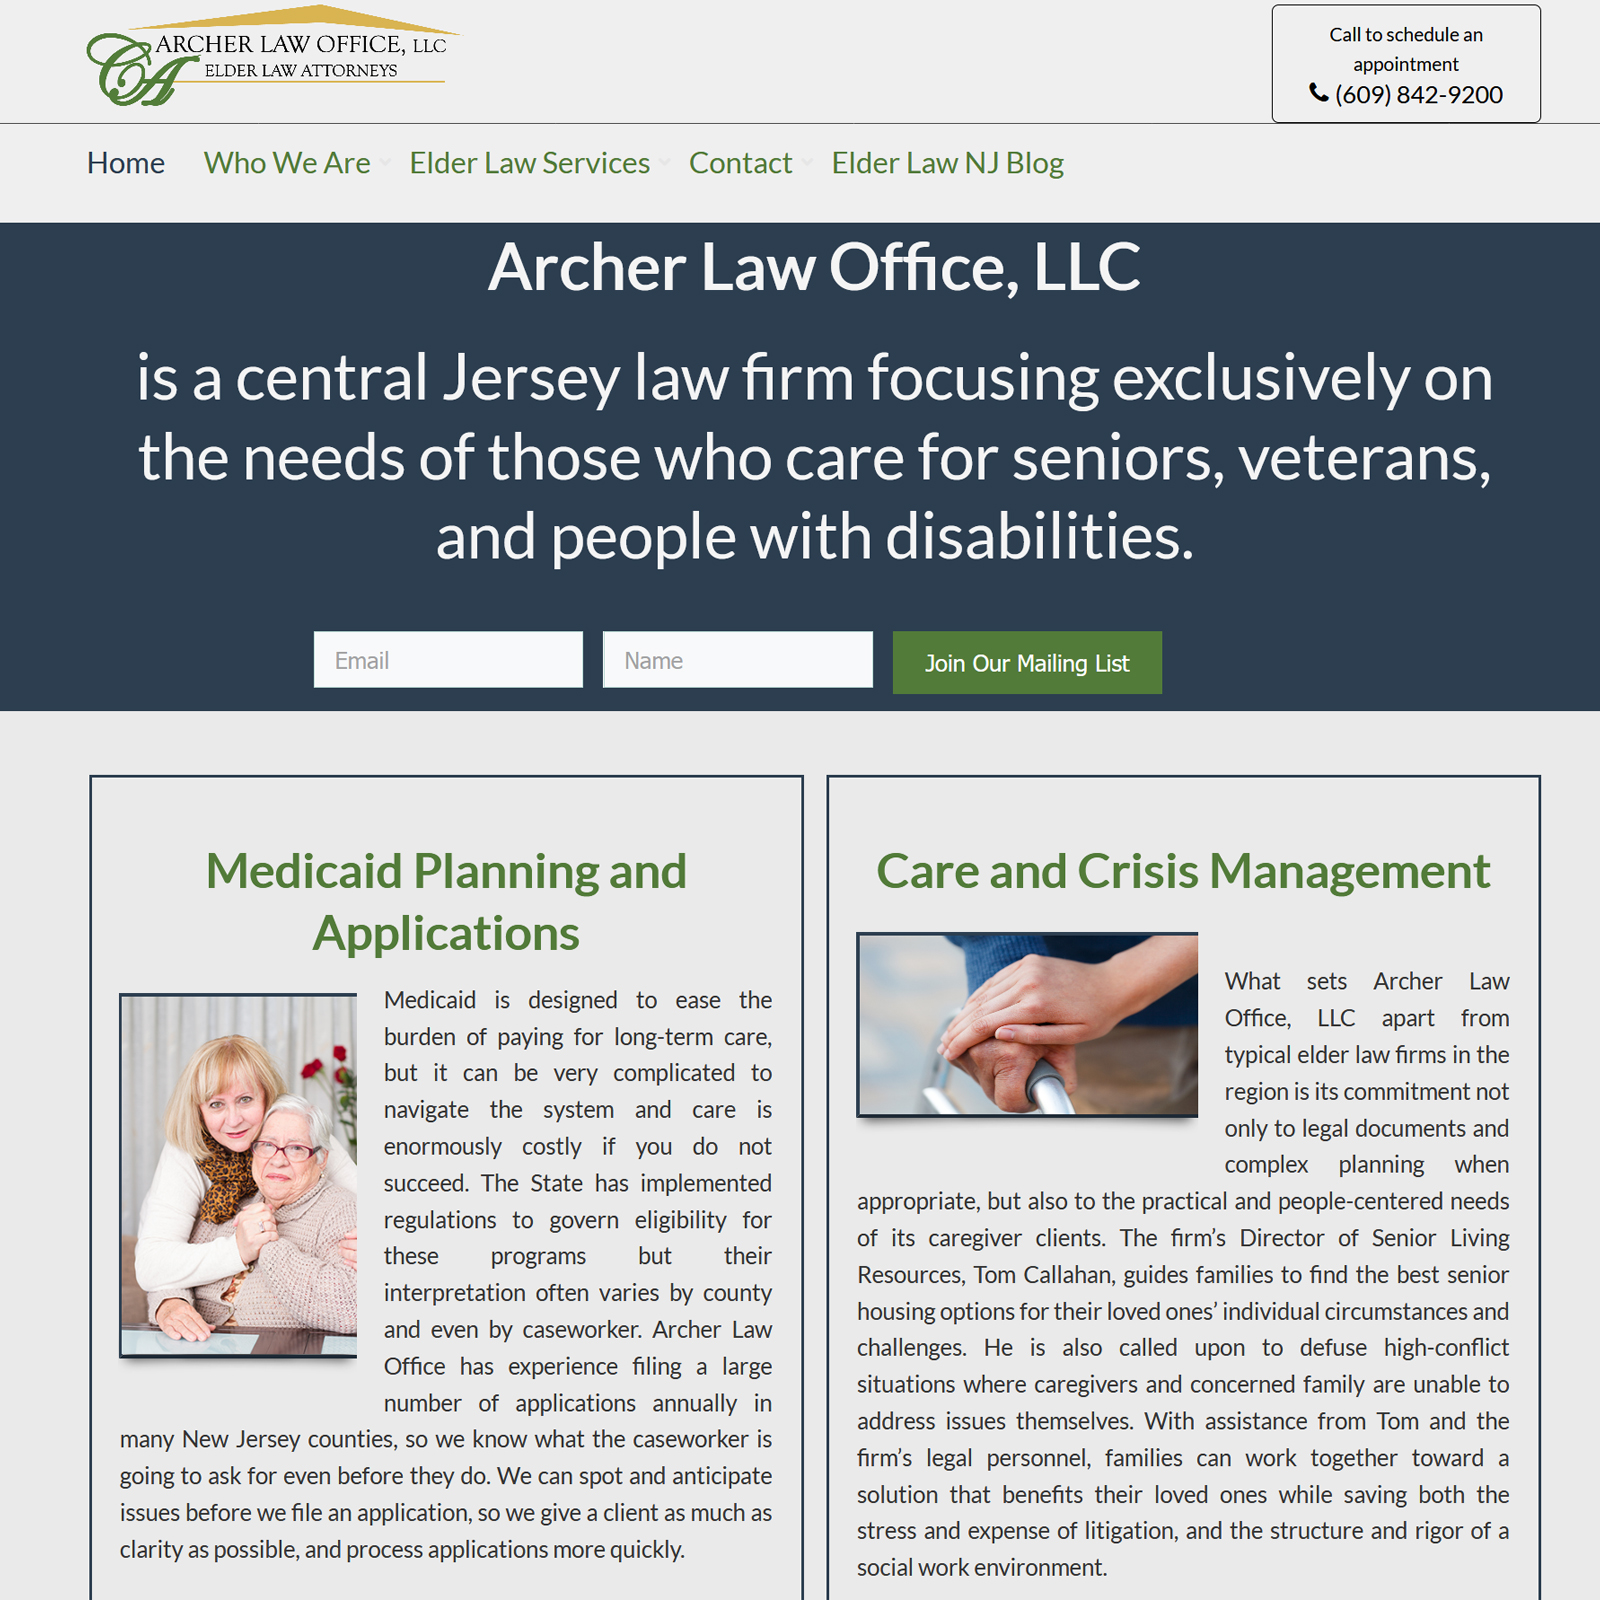 Archer Law Office Web Design and SEO